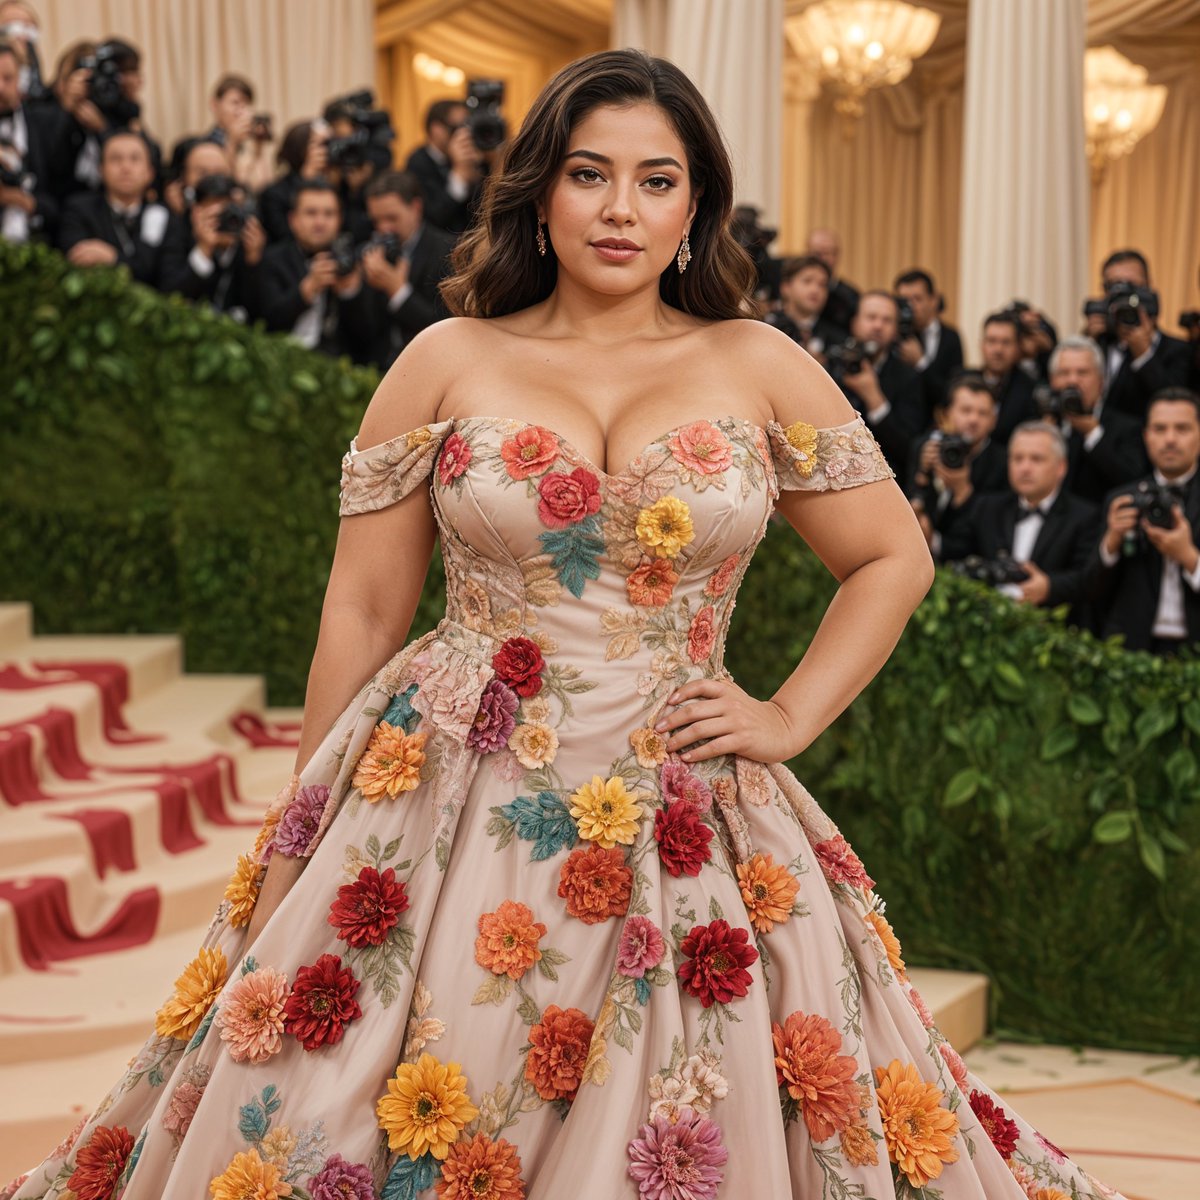 If we'd made it to the Met Gala this year, here’s how we'd rock the 'Garden of Time' theme. Peep the thread for the AI prompts we used 🧵👇